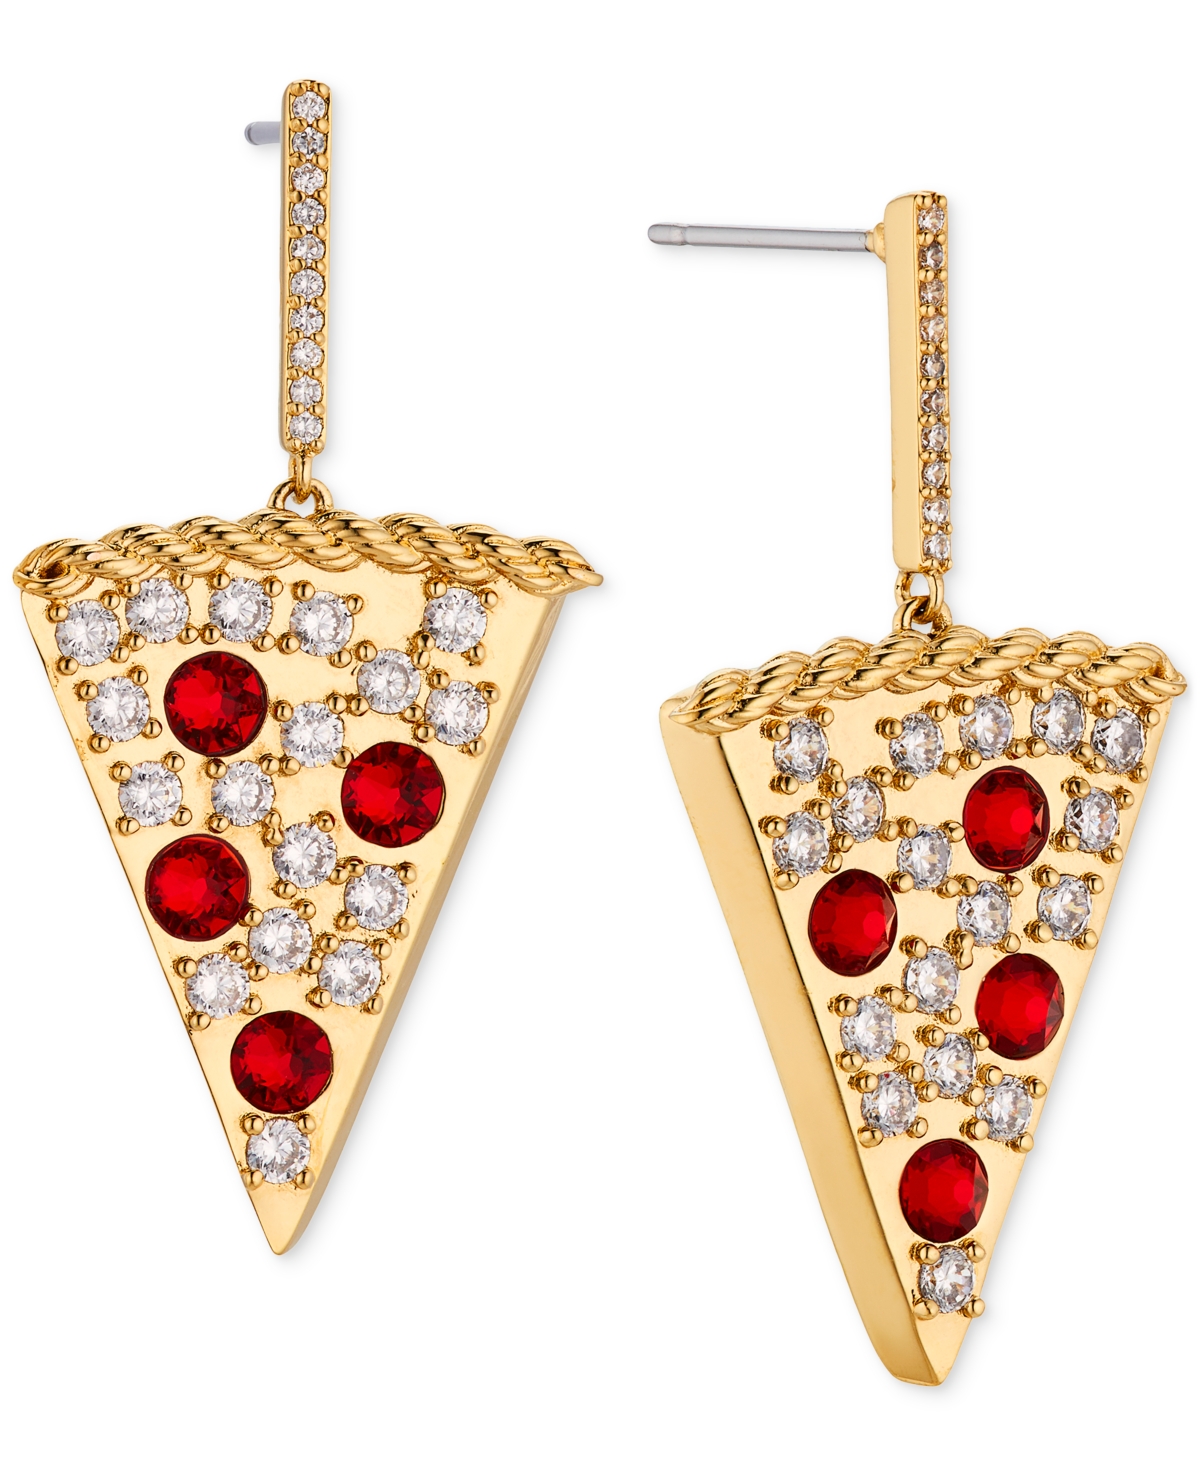 by Nadri 18k Gold-Plated Pave & Color Crystal Pizza Slice Drop Earrings - Gold